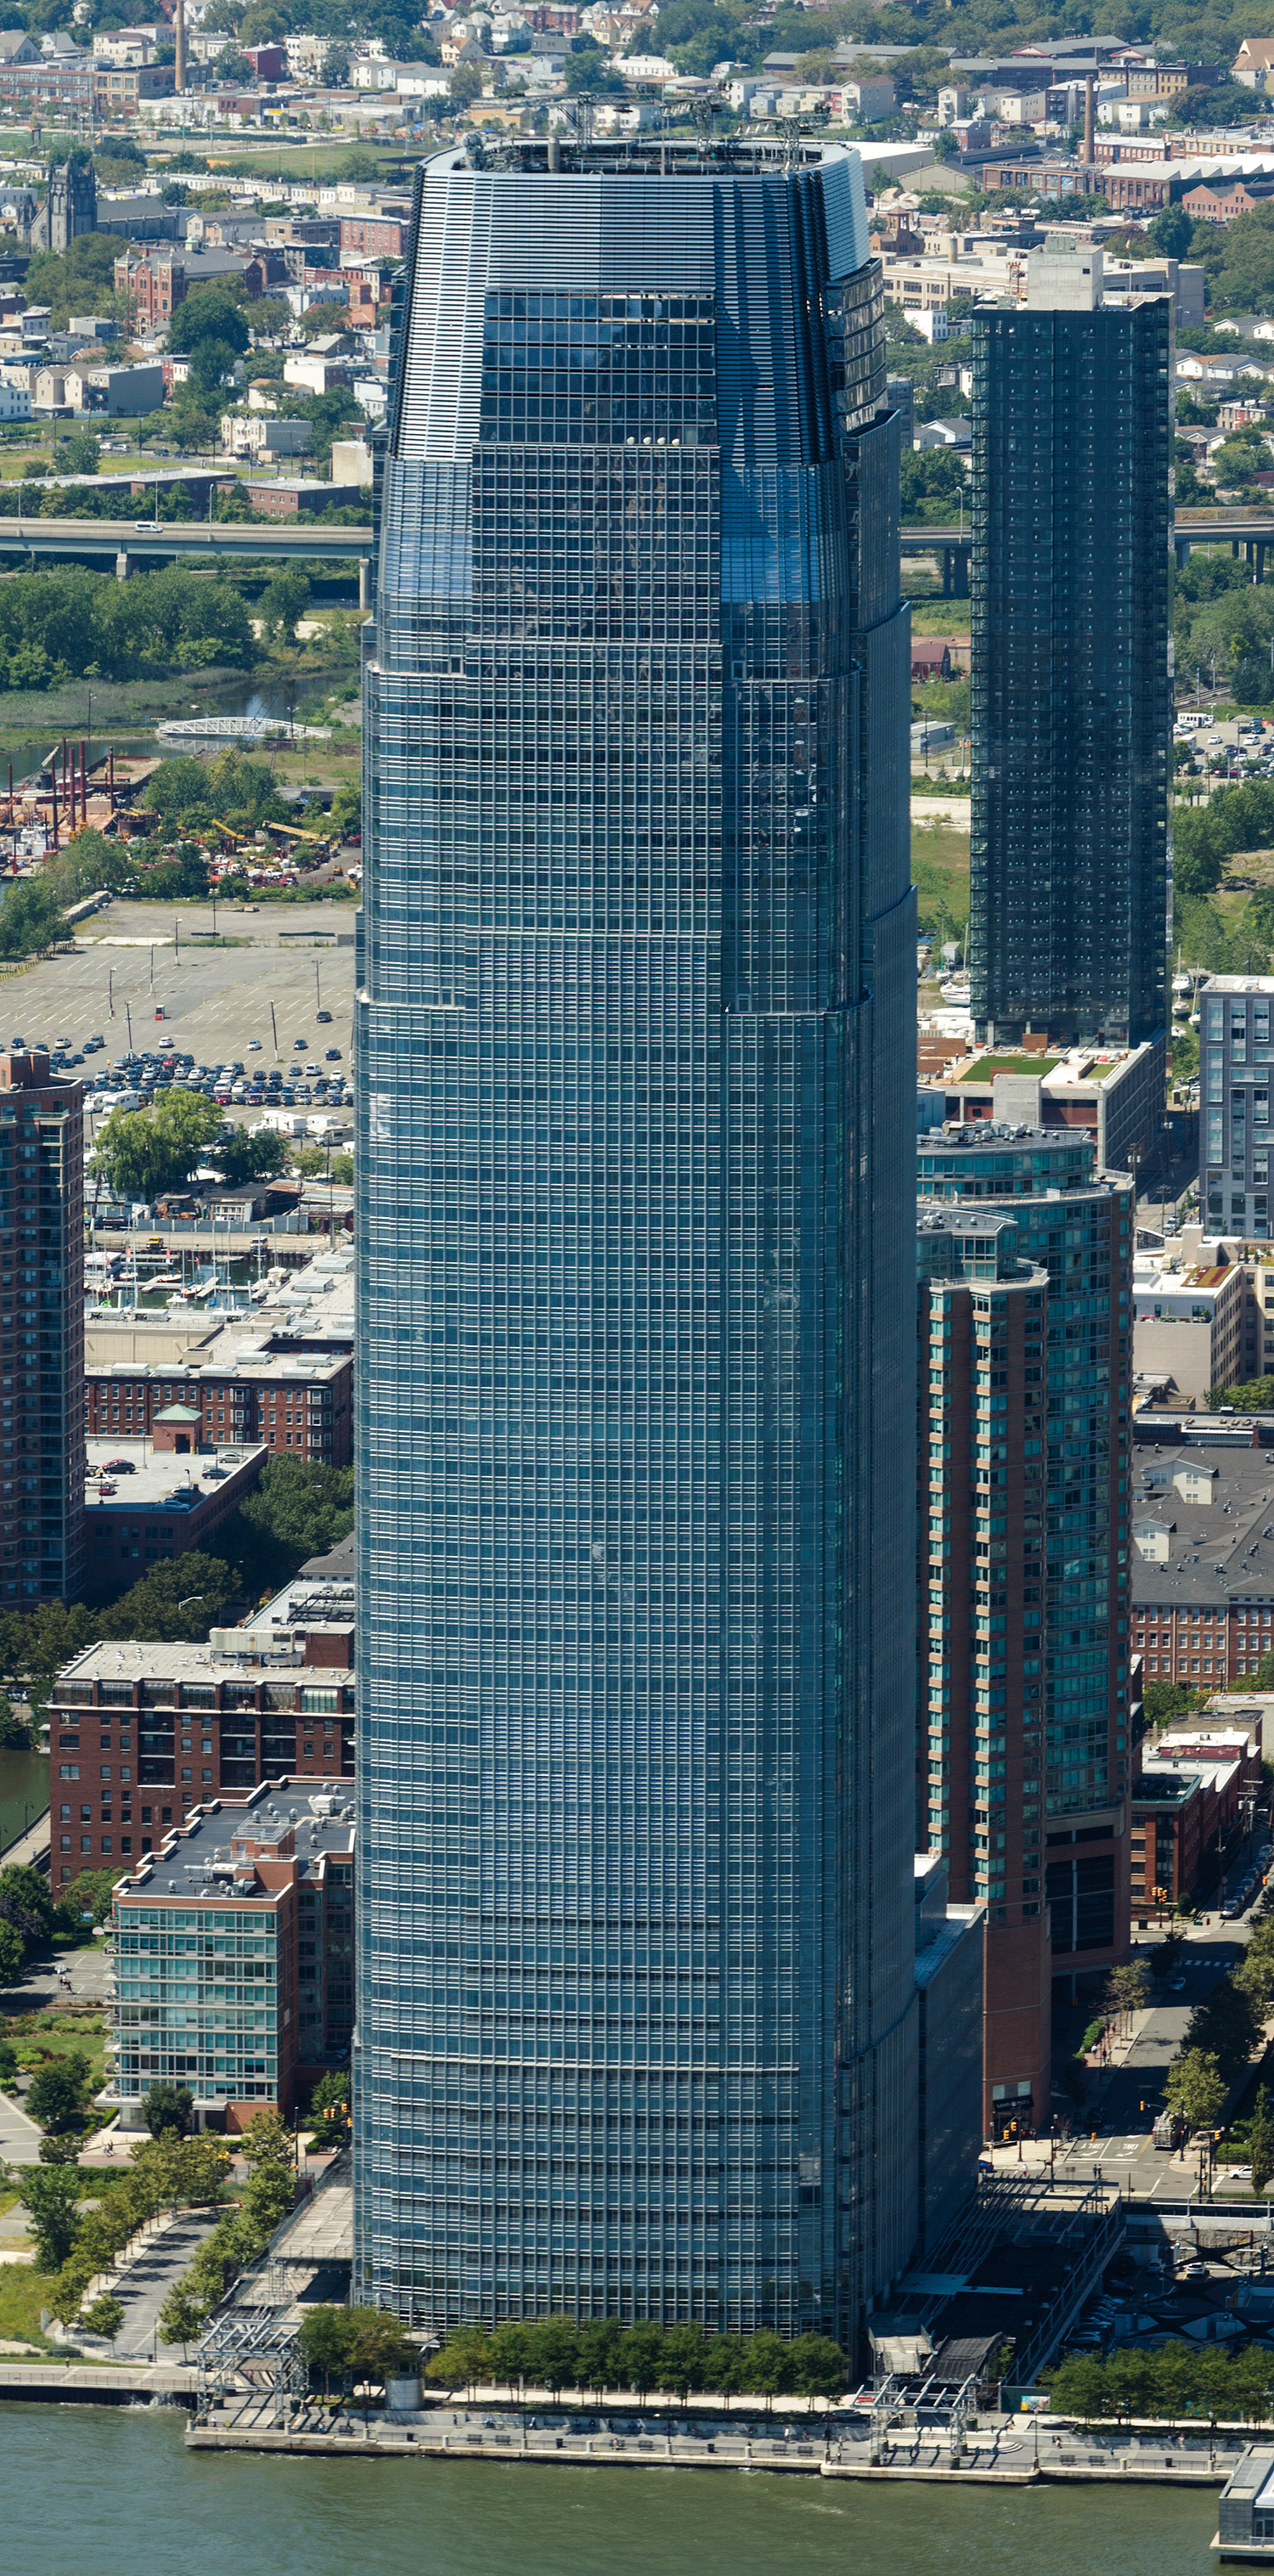 Goldman Sachs Tower, Jersey City - View from One World Observatory. © Mathias Beinling